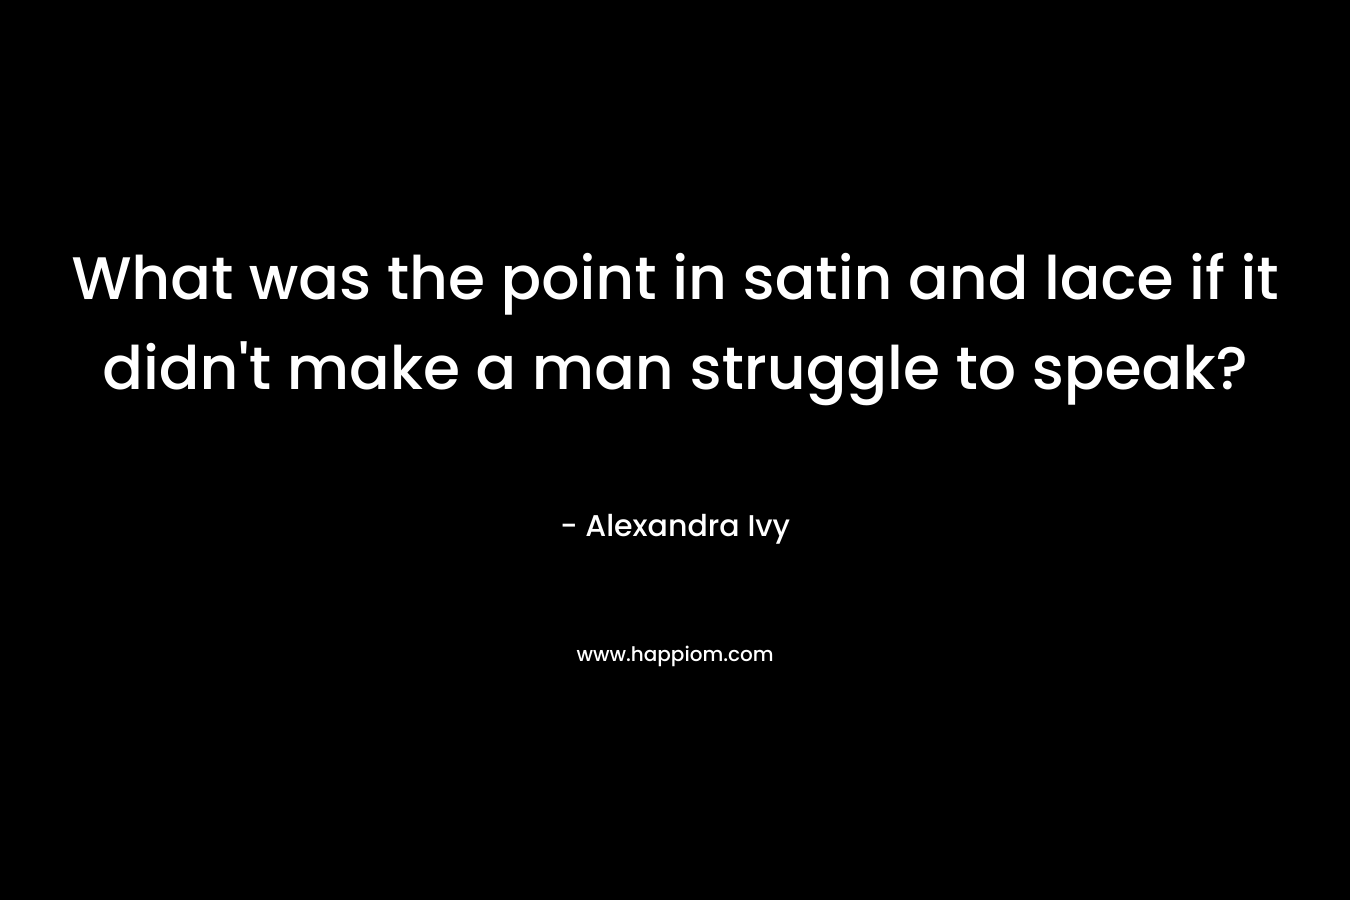 What was the point in satin and lace if it didn’t make a man struggle to speak? – Alexandra Ivy